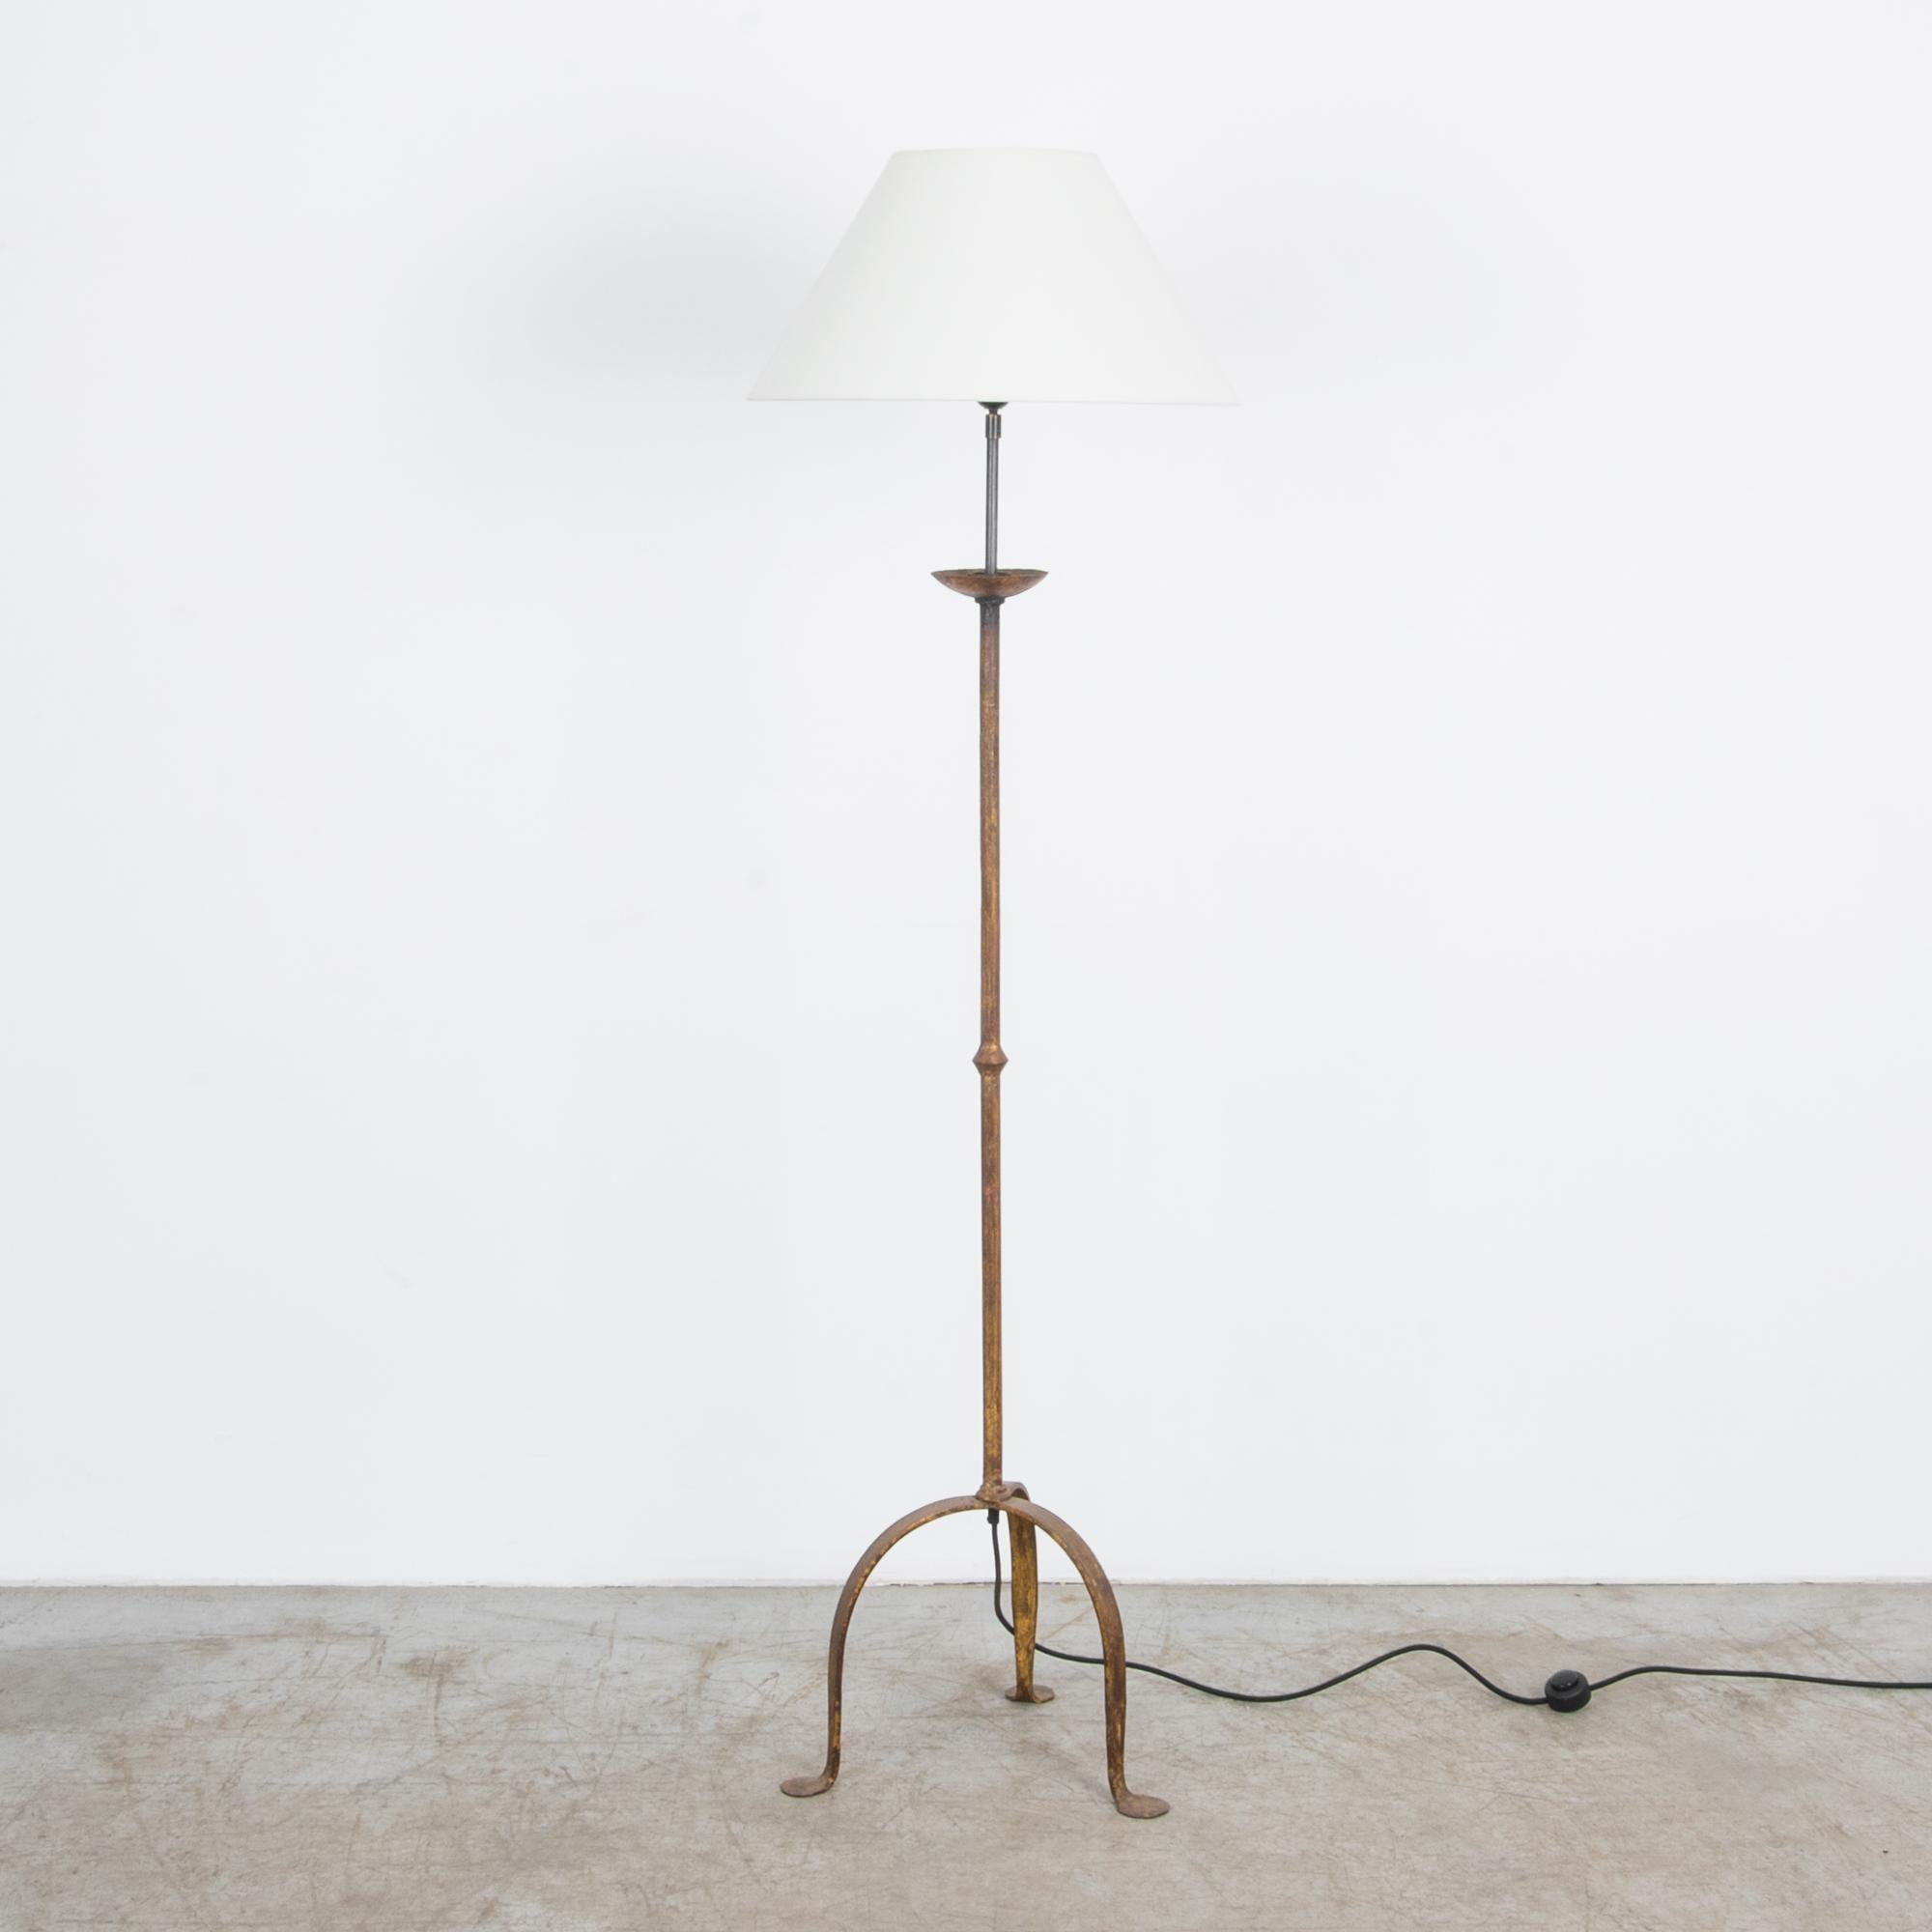 From France circa 1940, this wrought iron lamp captures the traditional forms of hand forged iron, seen through a Modernist lens. This rustic floor lamp rests on playful anthropomorphic feet, updated with contemporary electrical wiring. Aged gold